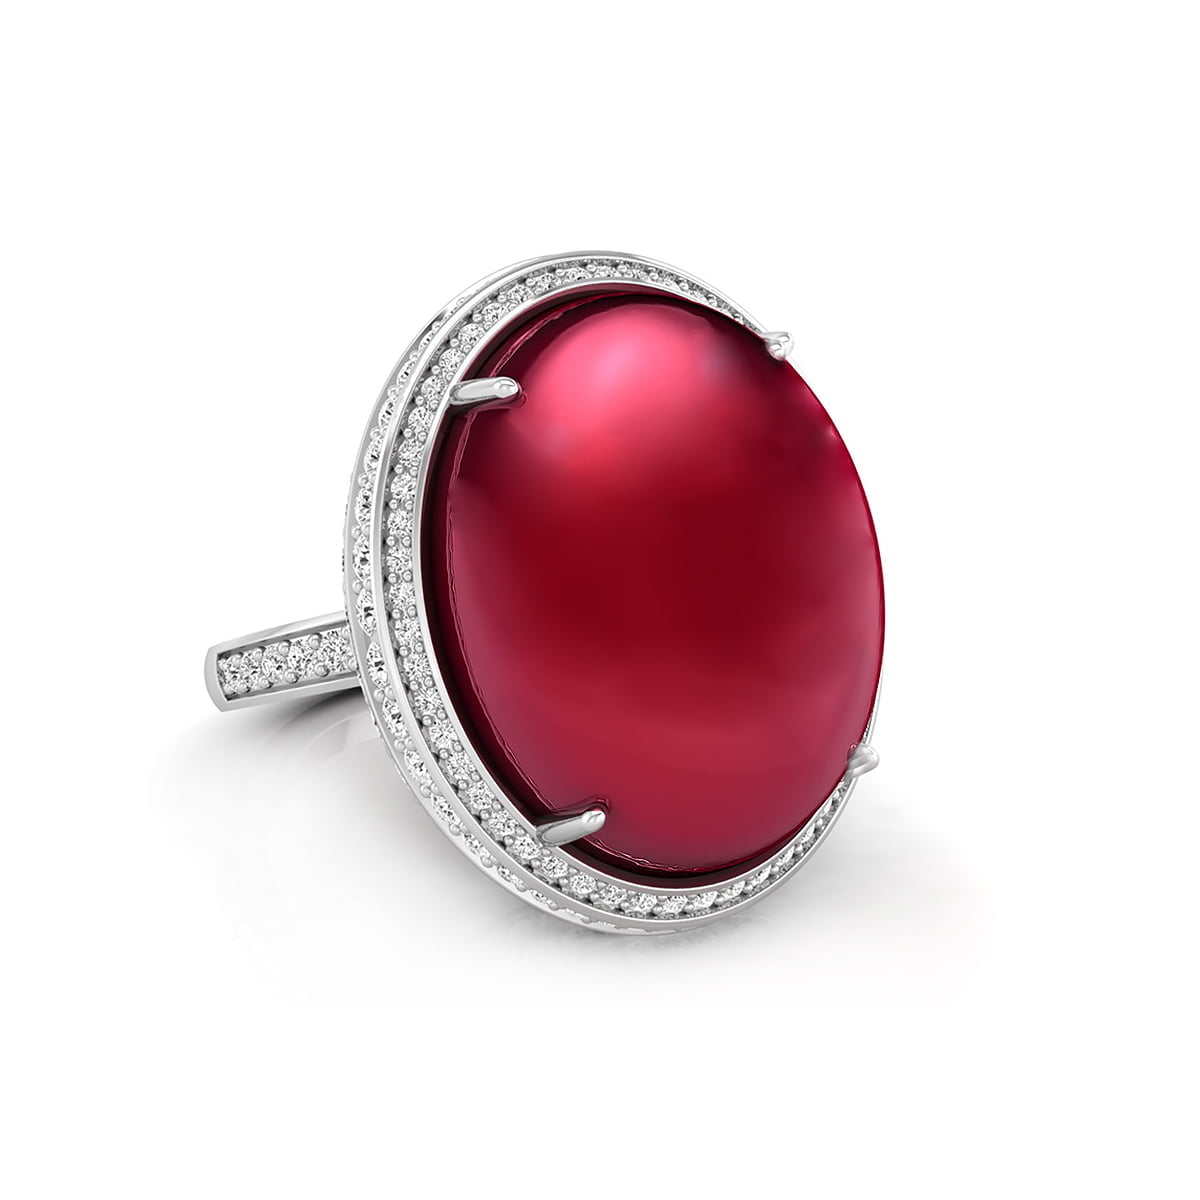 22x18 MM Oval Shape Pink Ruby Cabochon With White Round CZ Stone Halo Cocktail Wedding Ring